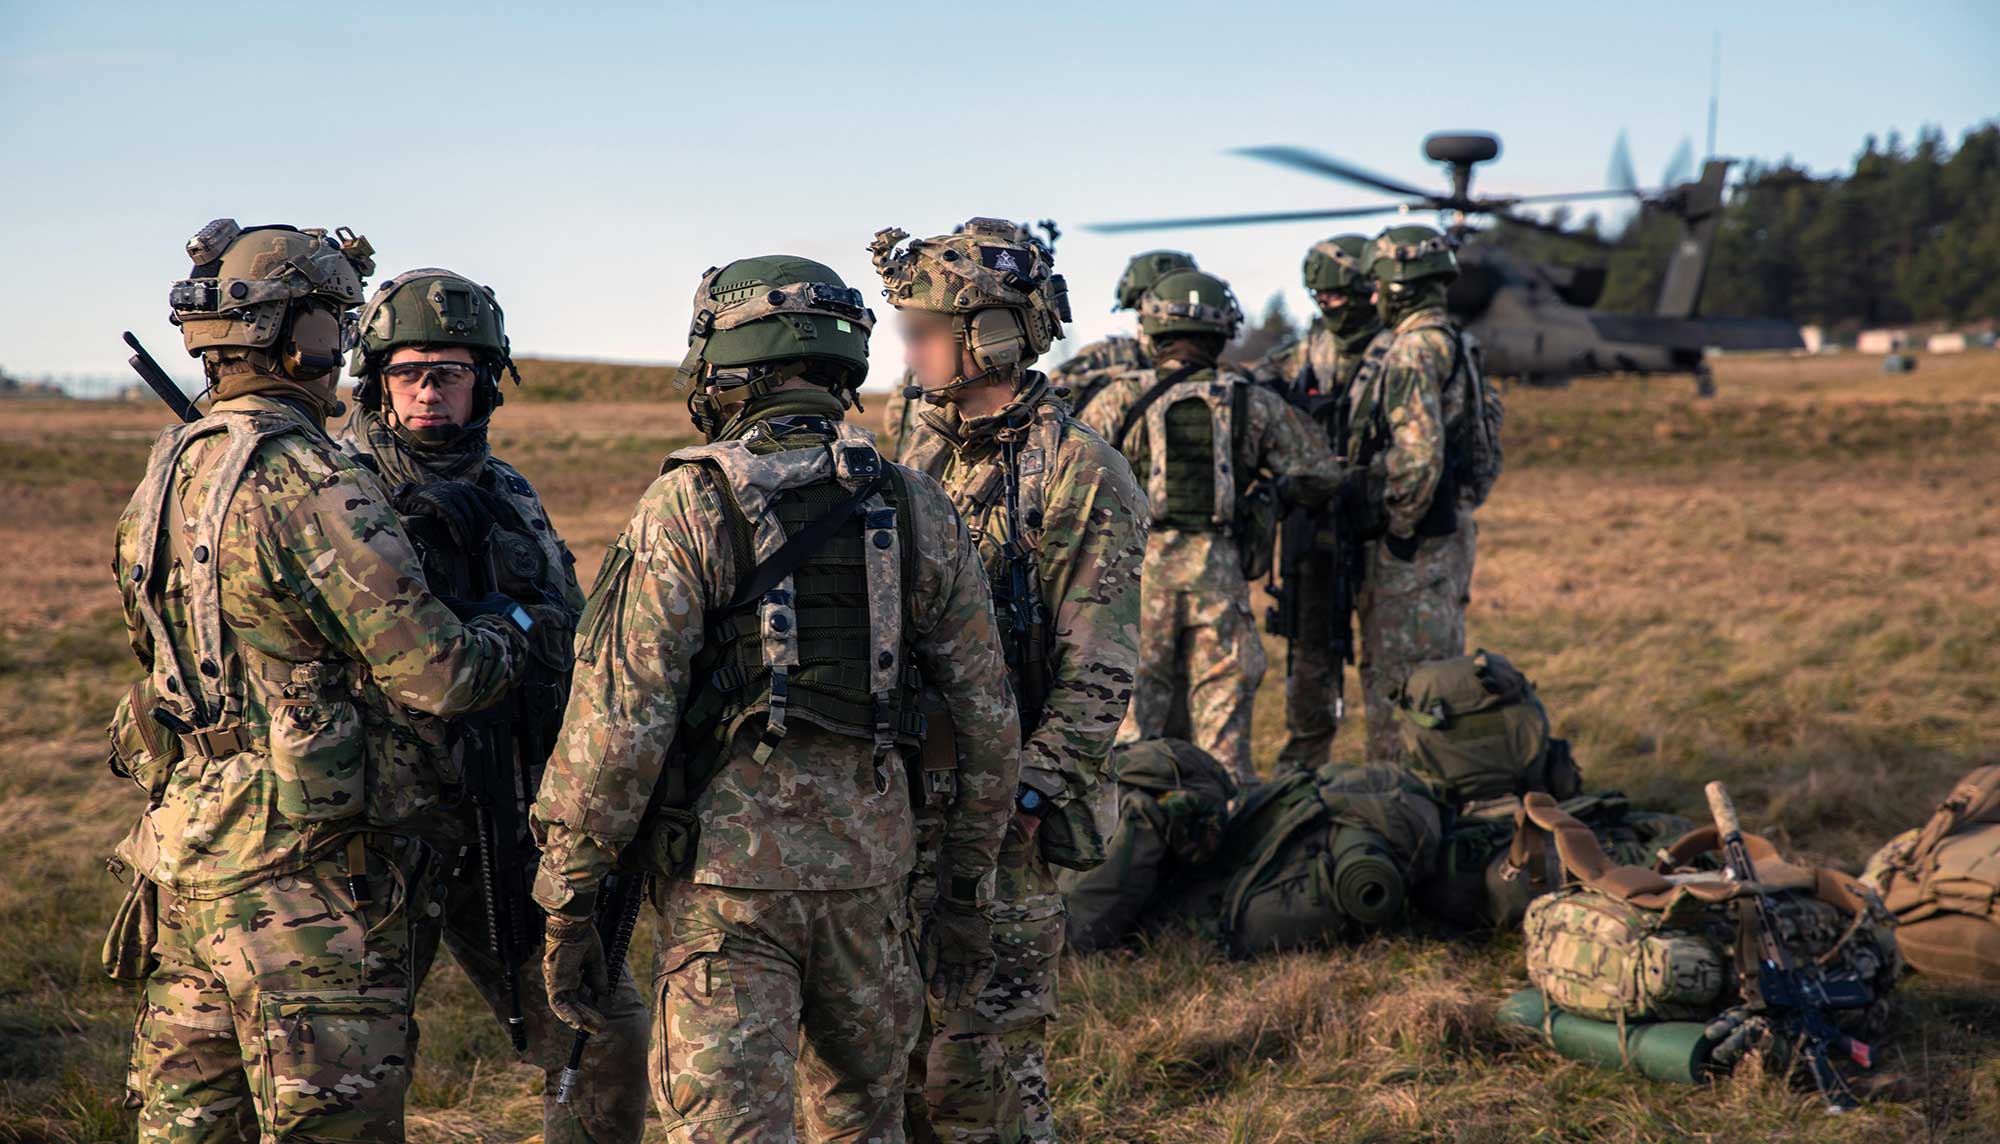 JFK's words in June 1962 continue to reverberate in the 21st century. Here, 10th SFG soldiers and their Lithuanian counterparts wait to board a U.S. Army UH-60 Blackhawk during Exercise Combined Resolve XVI on 6 December 2021, in Hohenfels, Germany. The exercise assessed the readiness of the 1st Armored Brigade Combat Team, 1st Infantry Division, and helped Ukrainian and Lithuanian Special Operations Forces hone their irregular warfare skills.